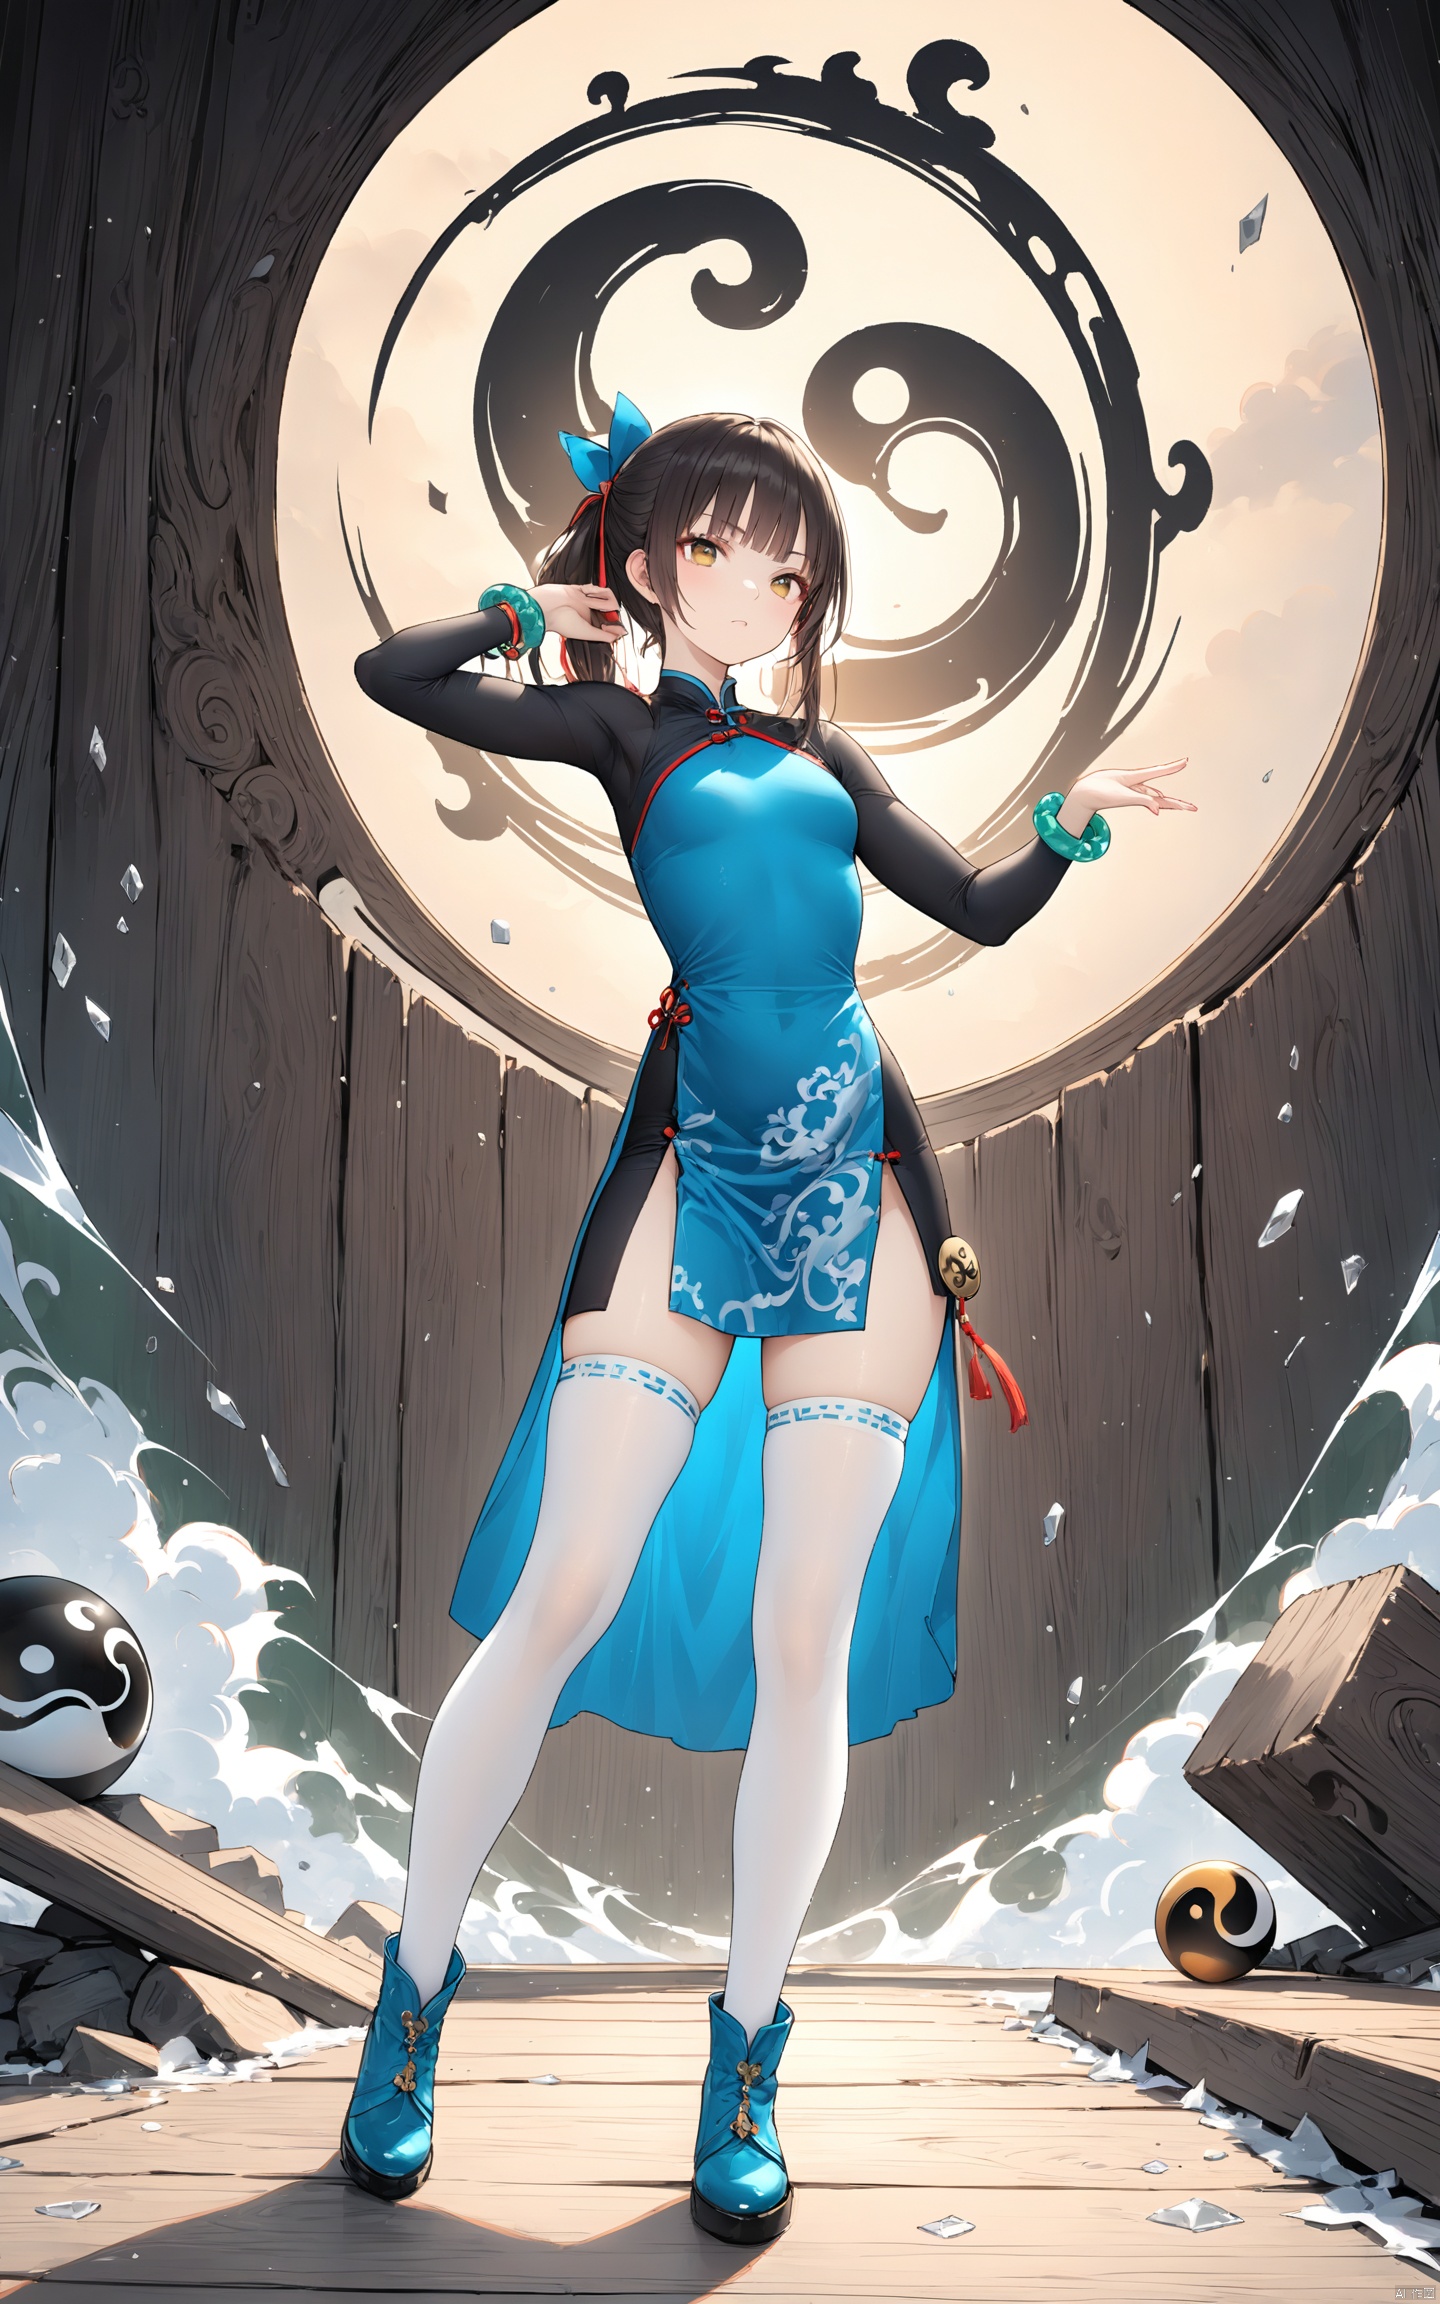 (Masterpiece), (Best Quality), Illustration, Super Detailed, hdr, Depth of Field, (Color), (White Stockings),1 character, Chun-Li inspired female martial artist, full body, donning her iconic blue qipao dress with golden accents and Mandarin collar, split sides revealing a high-cut black compression suit underneath, complemented by form-fitting black tights, traditional Chinese cloud-pattern embroidered white boots reaching mid-thigh, sporting a pair of bouncy high ponytails tied with red ribbons, dark flowing bangs framing her determined expression and bright almond-shaped eyes, accessorized with a jade bracelet on each wrist and a yin-yang medallion around her neck, standing atop a shattered wooden board, demonstrating her signature Hyakuretsukyaku kick pose, muscles flexed, embodying both grace and raw power.